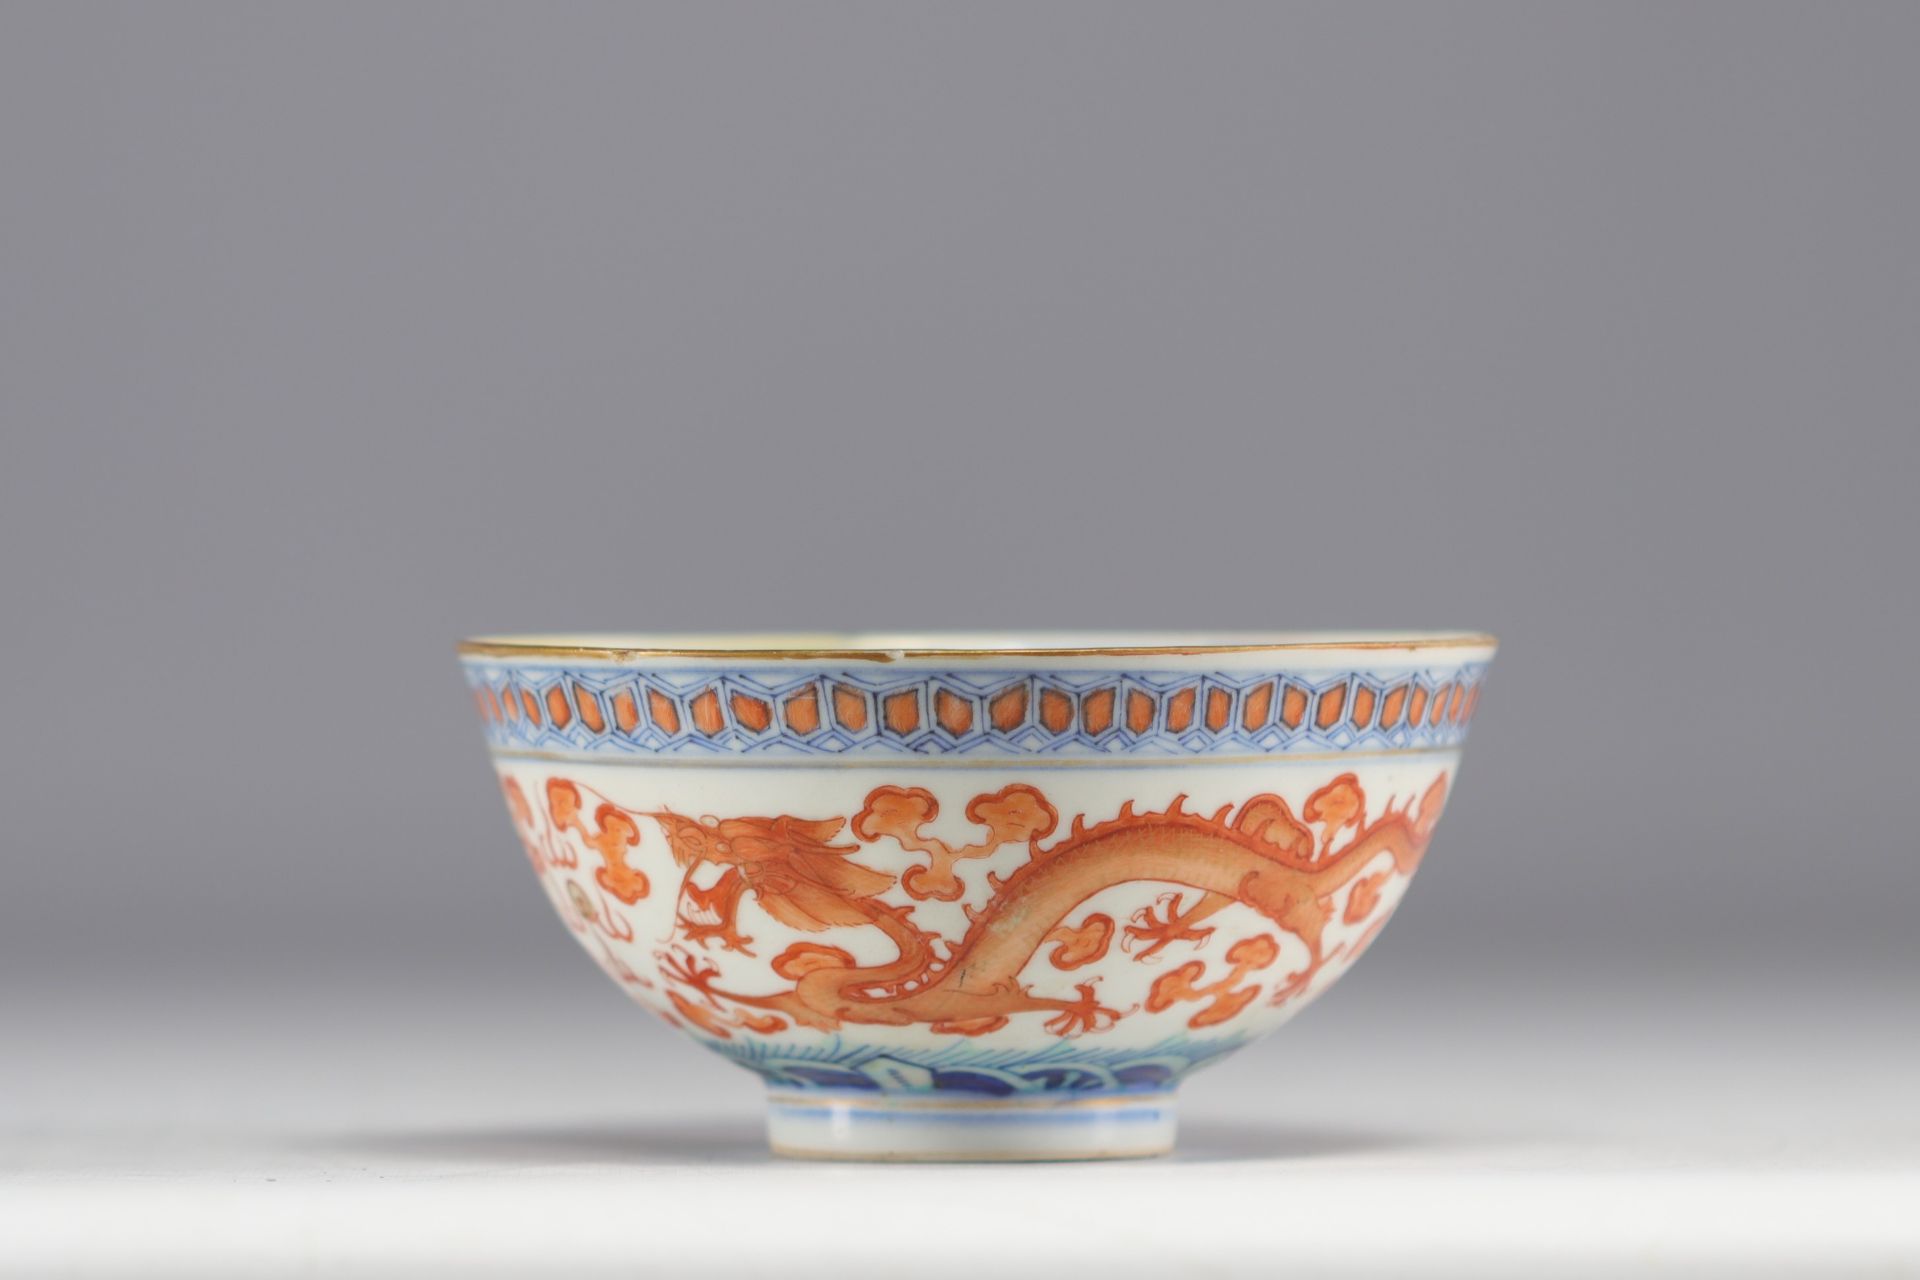 China - Porcelain bowl decorated with dragons with five claws, blue mark under the piece. - Image 6 of 6